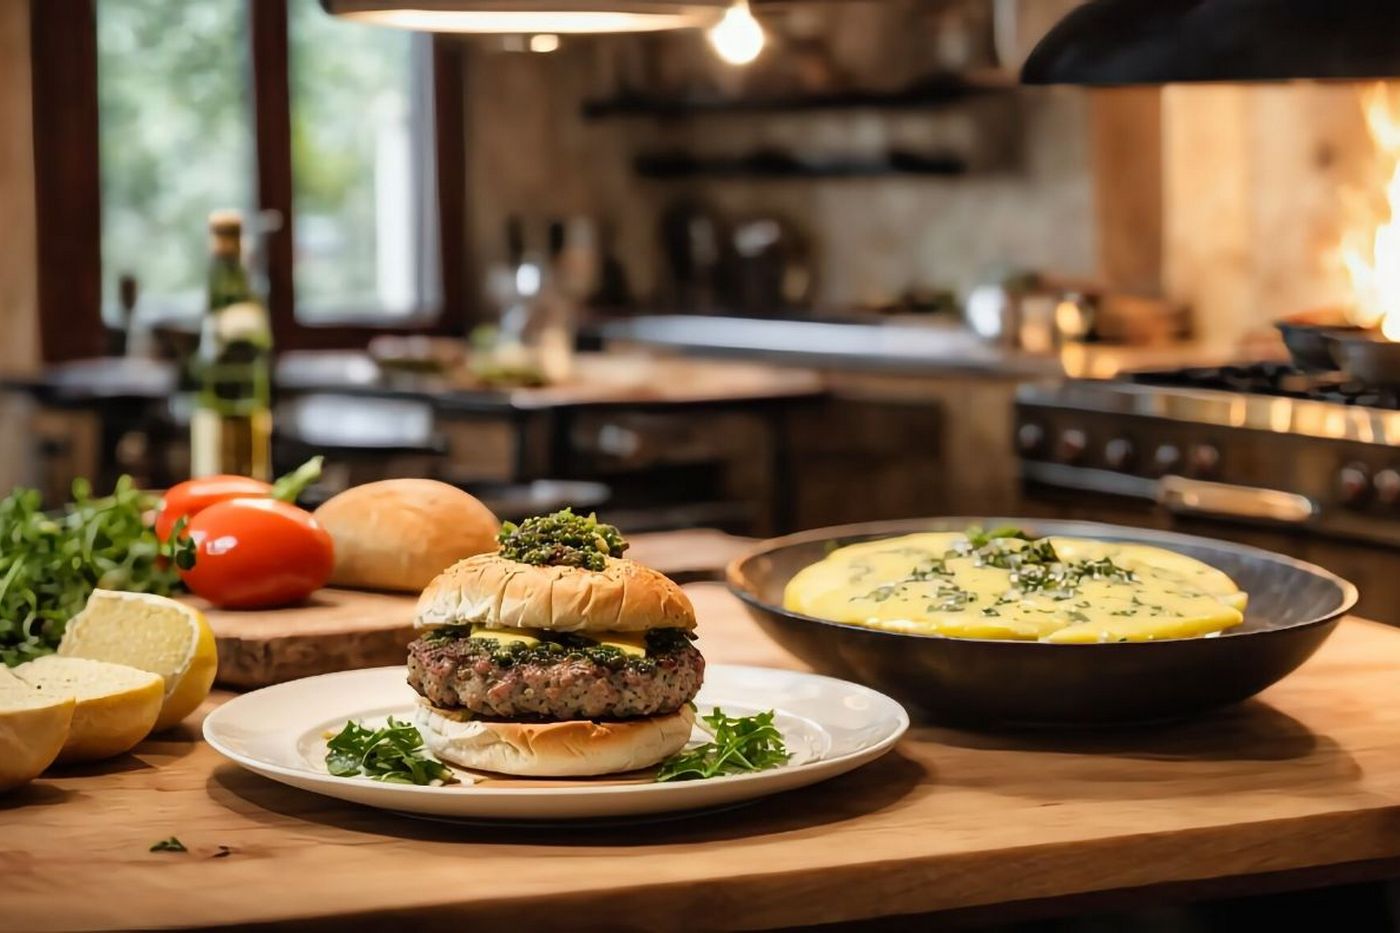 20 Argentinian Asado Burgers With Provolone and Chimichurri (3)